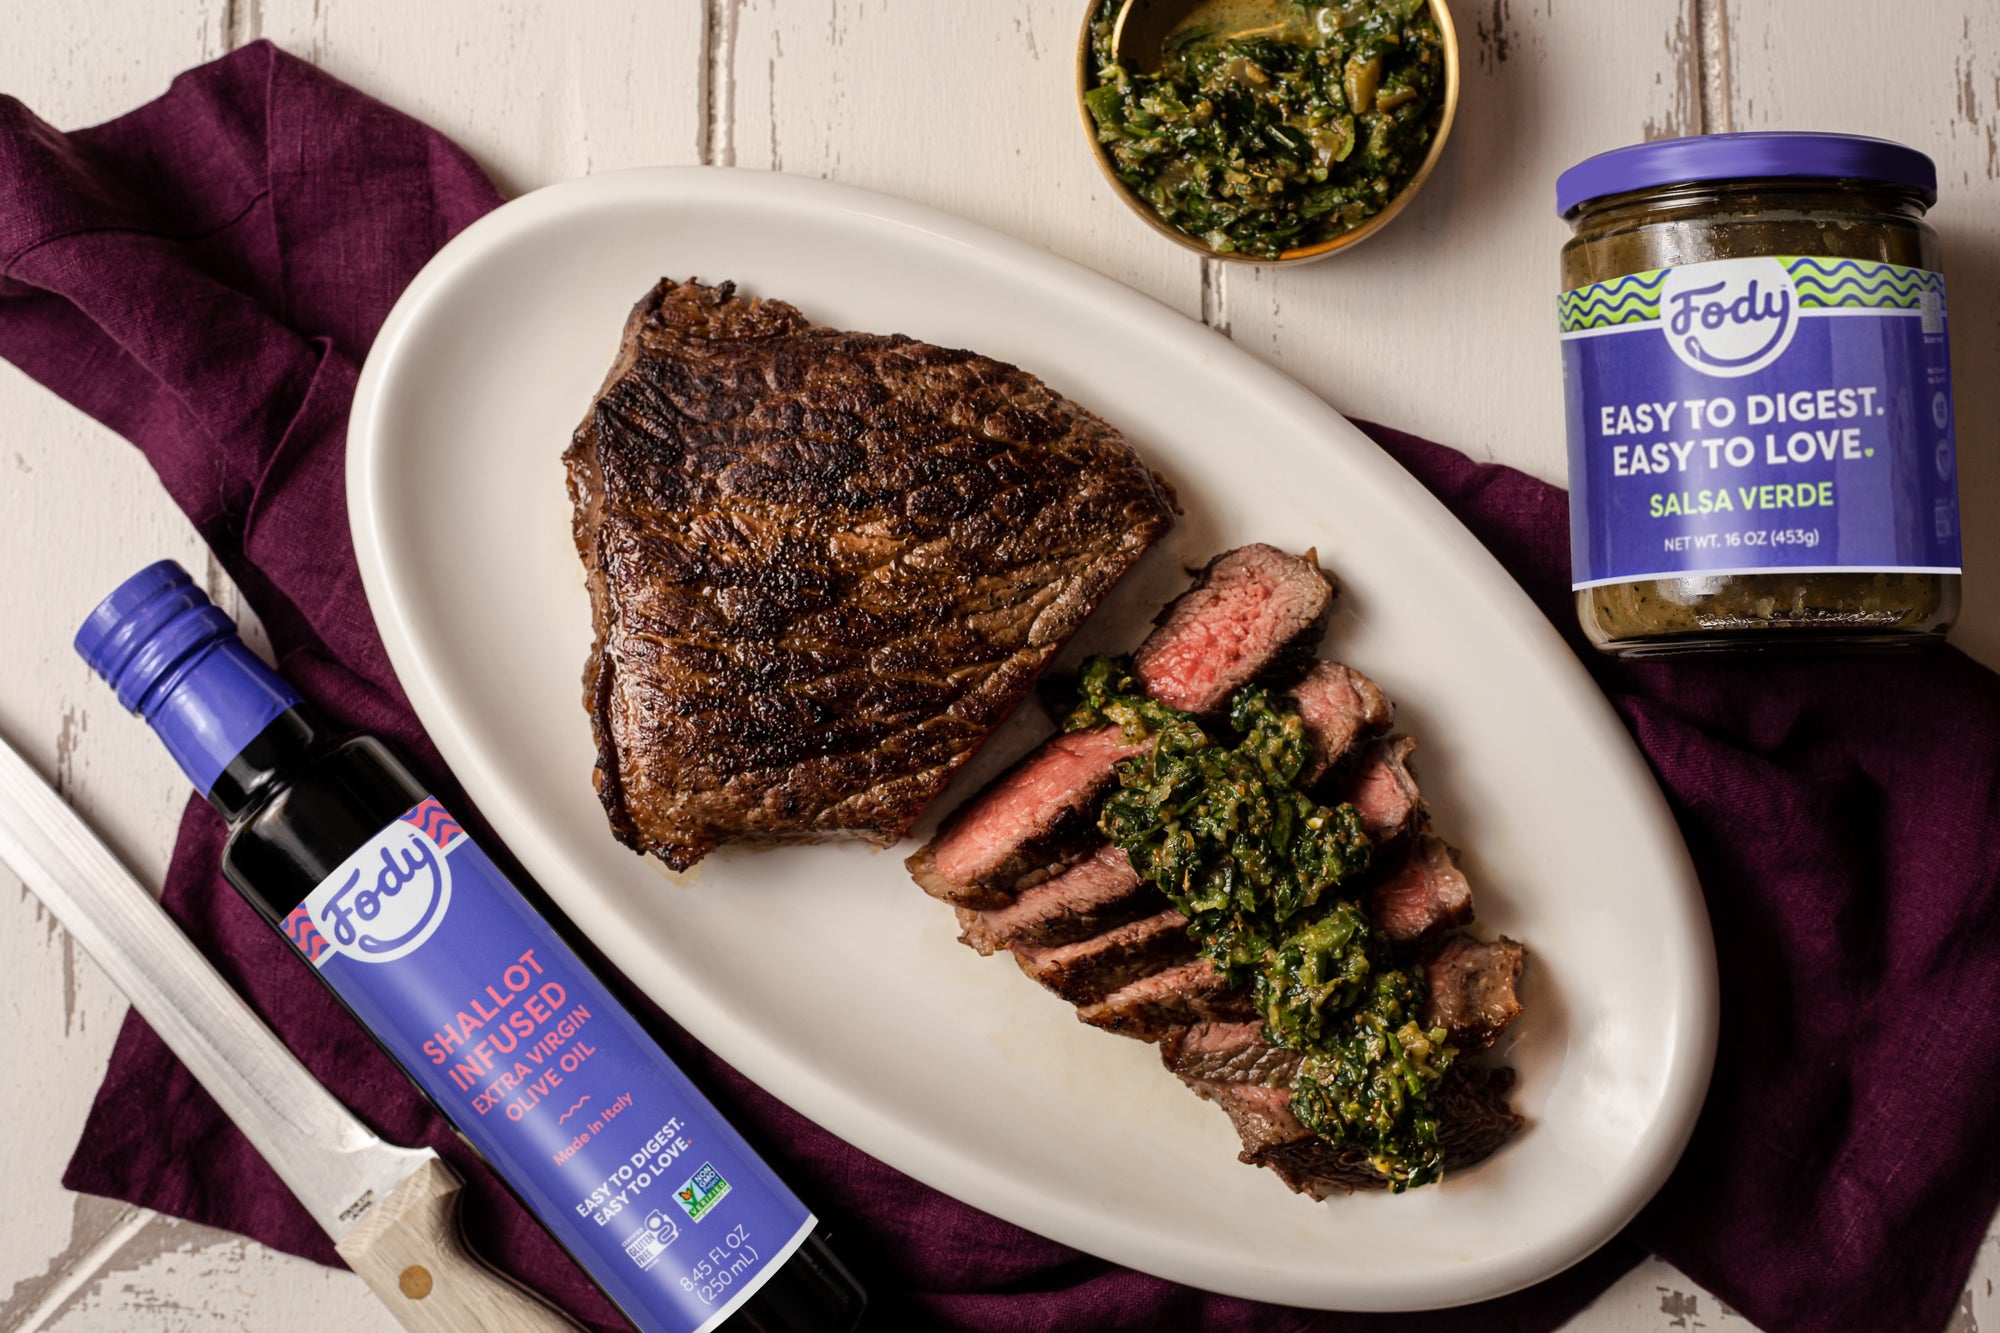 An image of Fody's steak with salsa verde chimichurri sauce. The steak is finely cut and topped with the green garnish. Bottles of Fody Foods salsa verde and olive oil are displayed alongside the steak dinner.